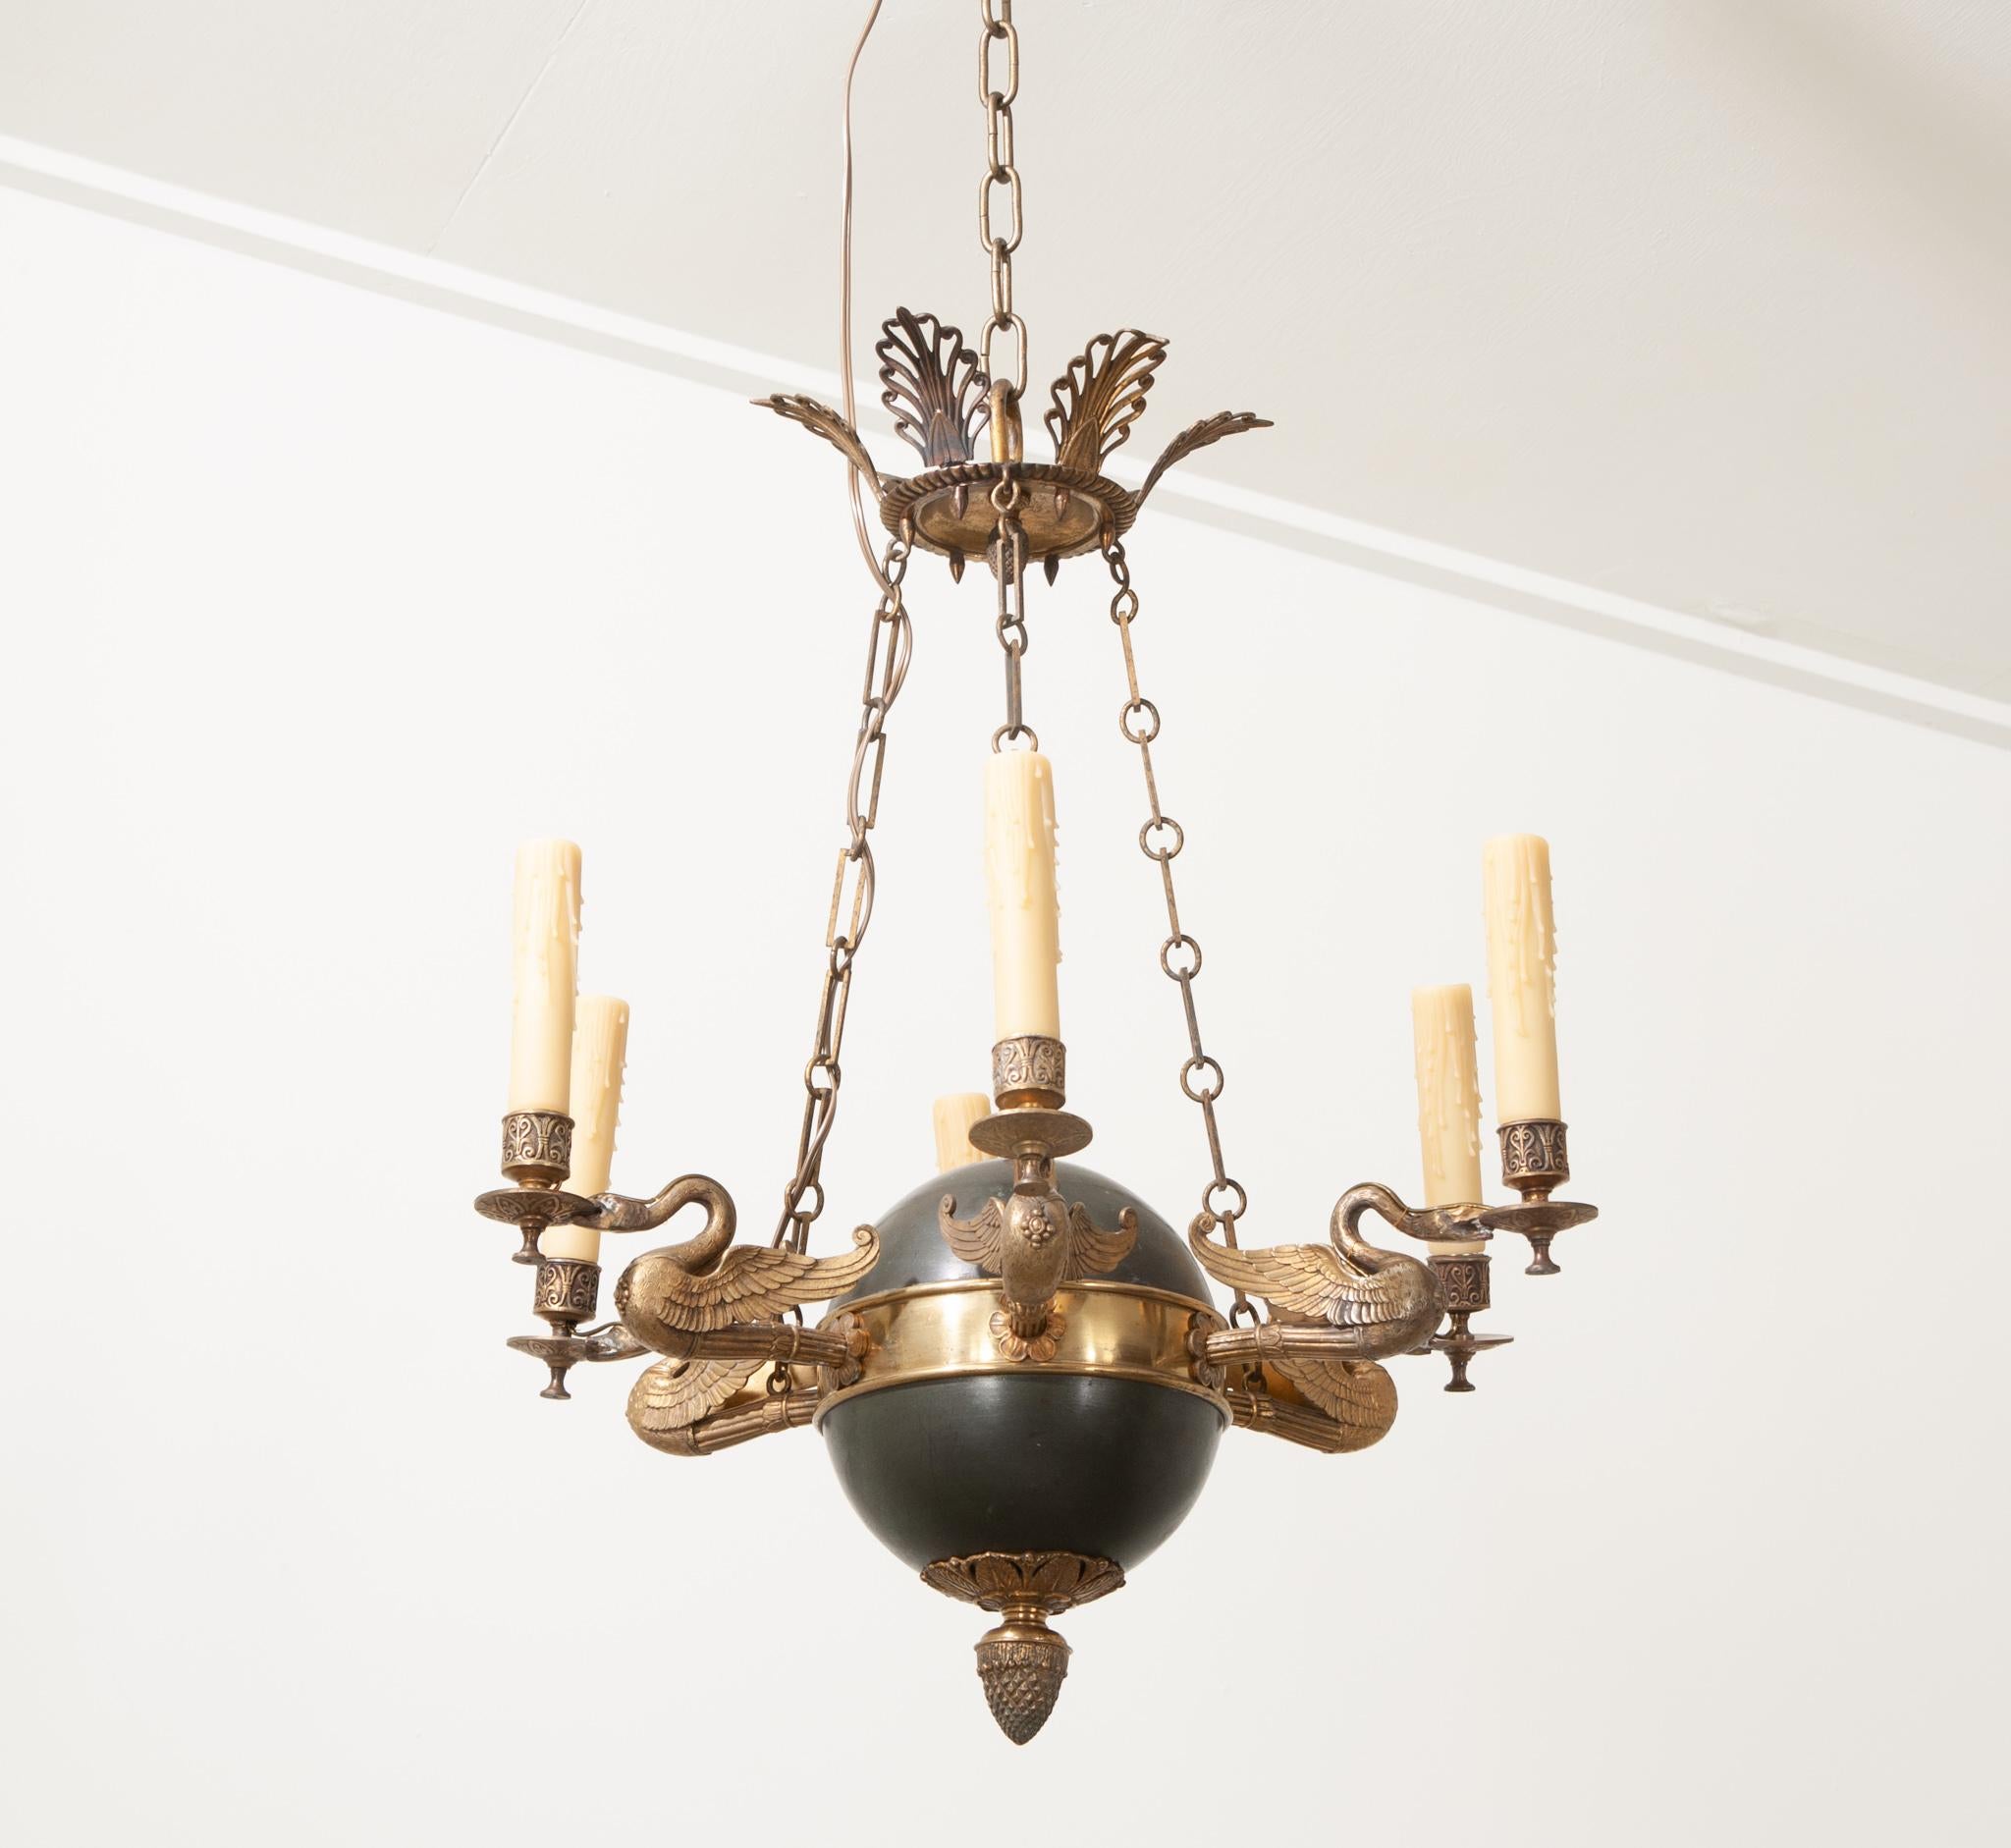 A French 19th Century Empirically styled six arm chandelier that is just as artful as it is functional. Its spherical black brass suspension weight and patinated brass design elements contrast each other wonderfully. The underside of the round